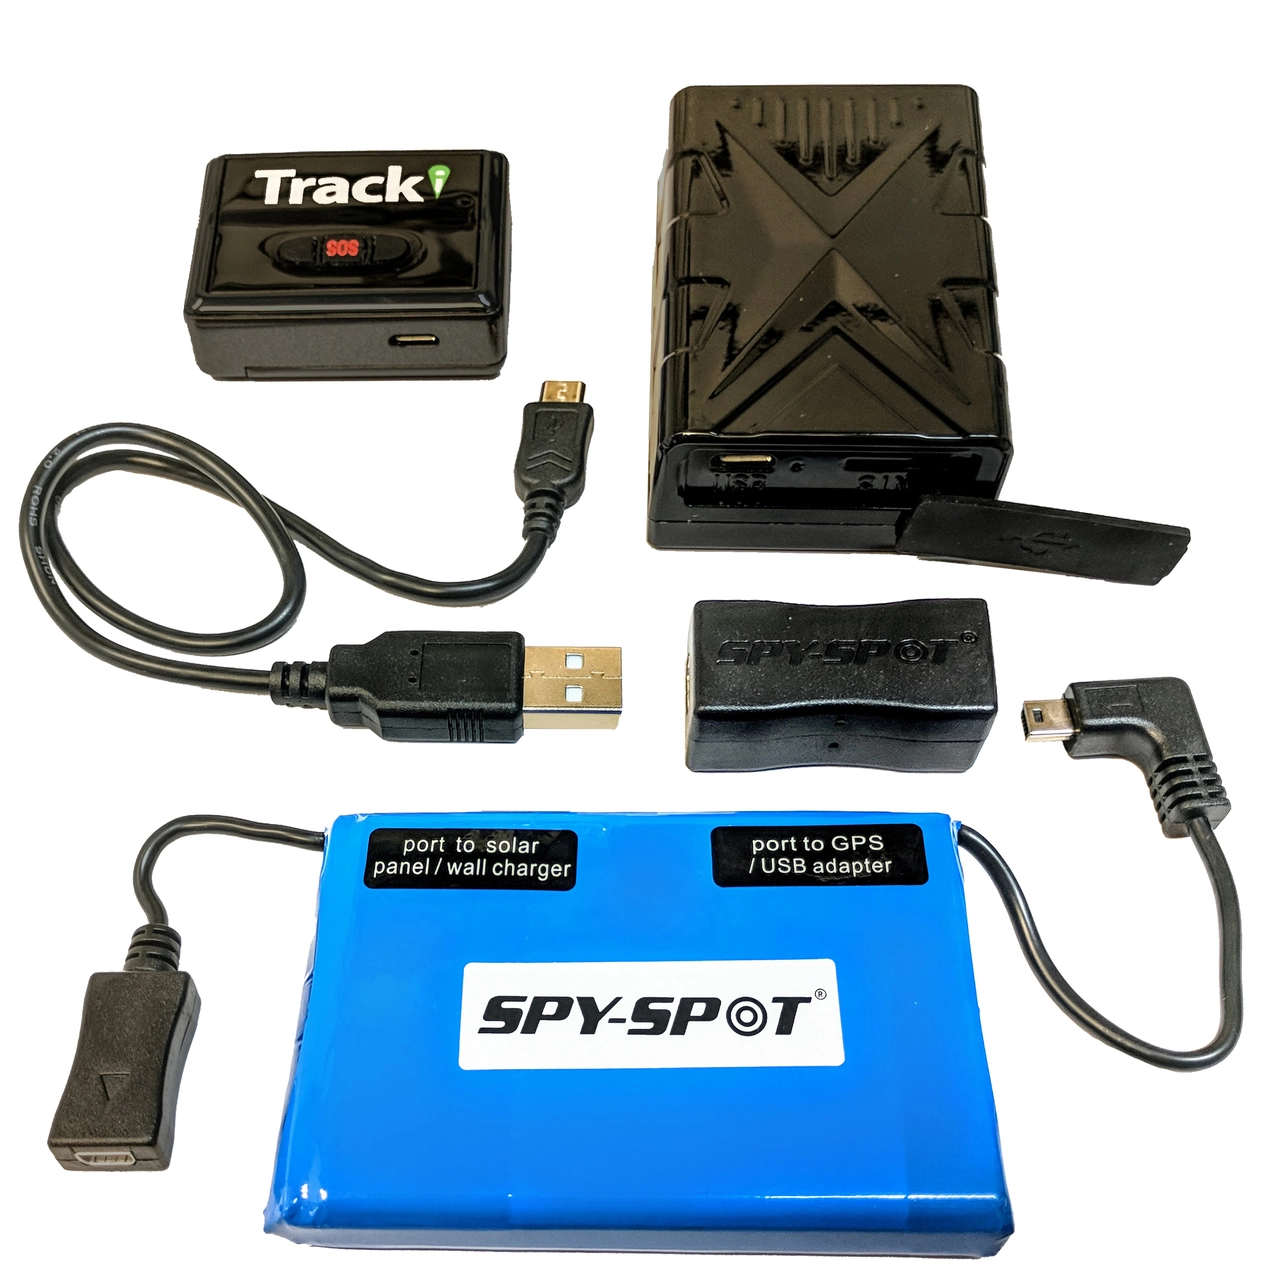 SpySpot Tracking Kit - 4G Mini GPS Tracker GL 320MG with Solar Powered Magnetic Waterproof Case, Battery and USB Adapter - Subscription required